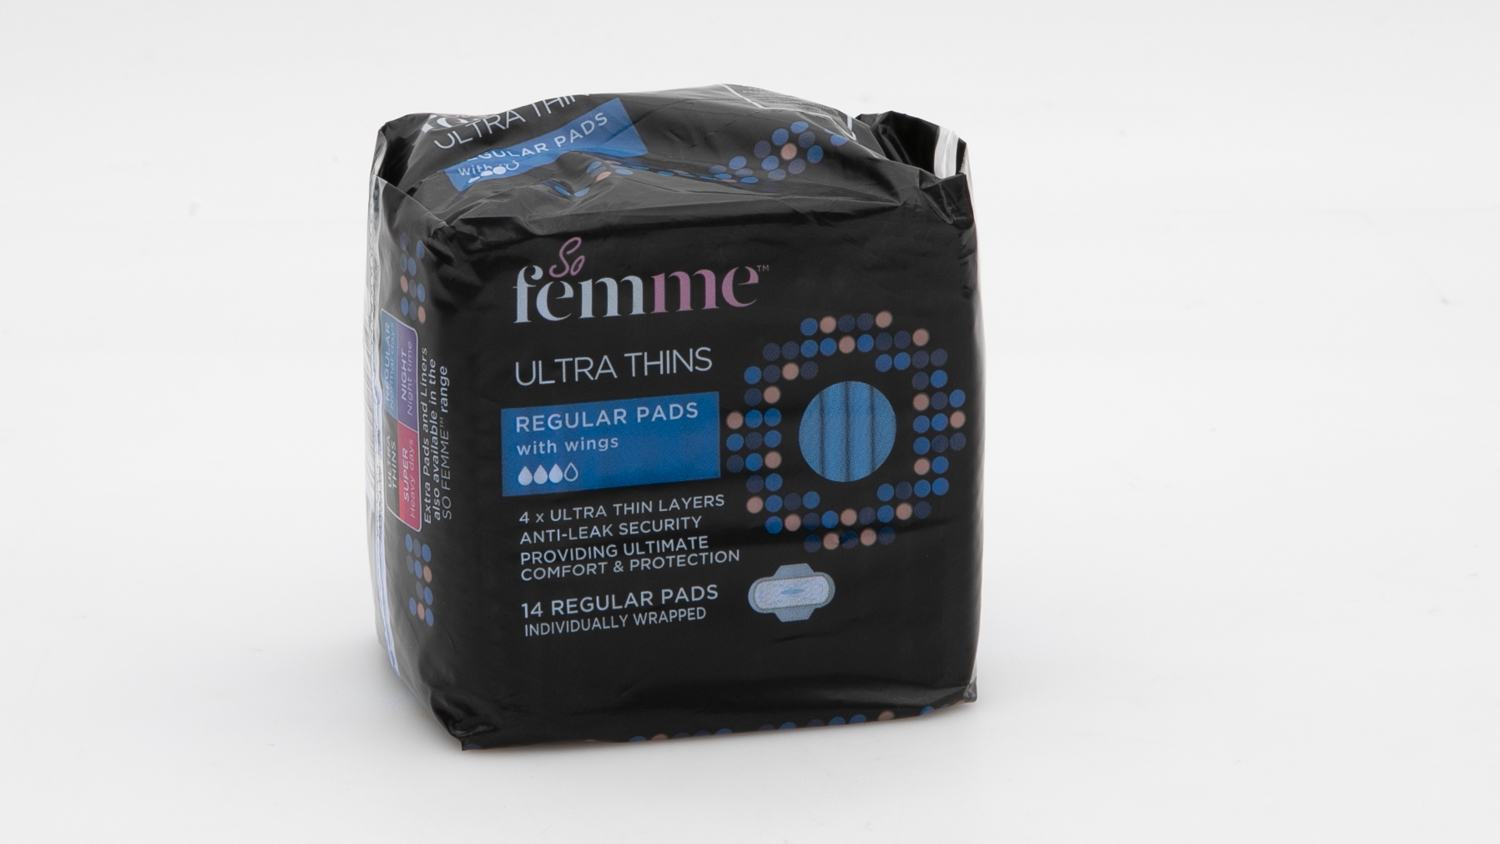 Aldi So Femme Ultra Thins Regular Pads with wings carousel image